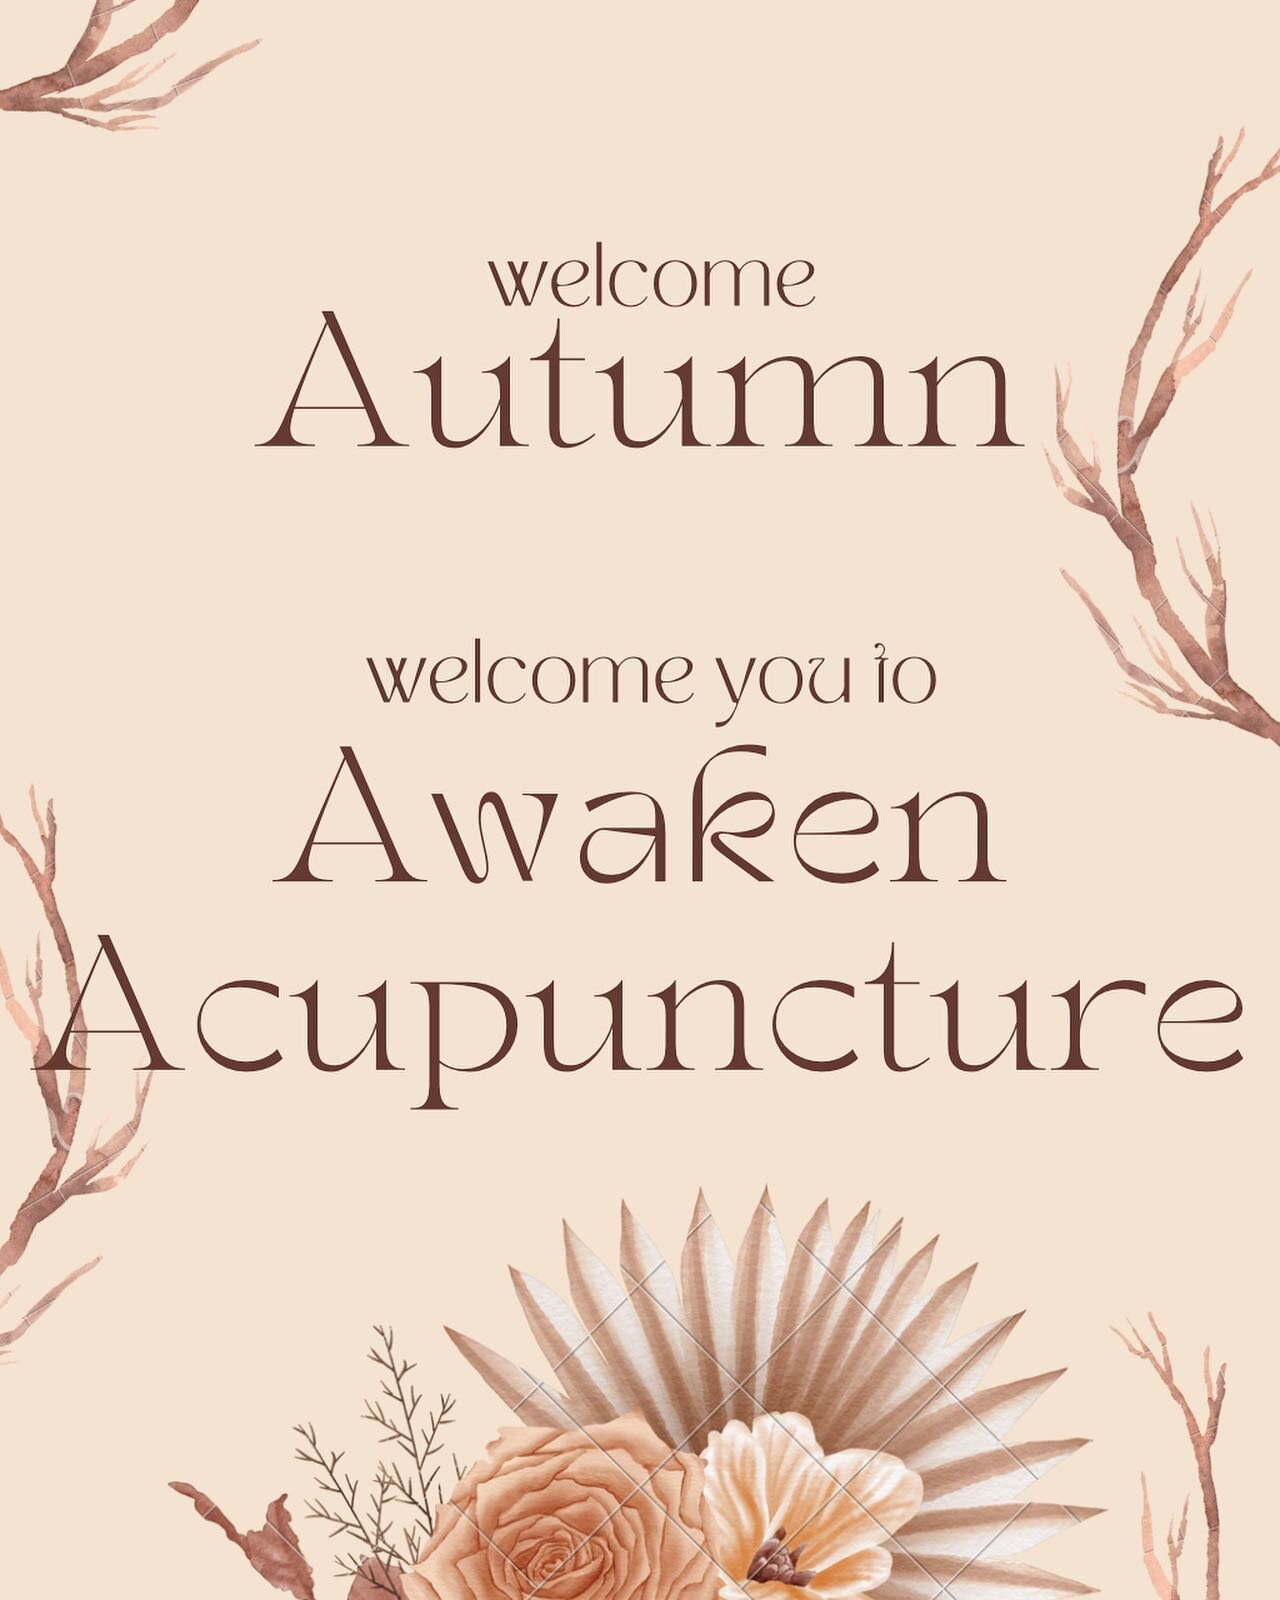 Welcome Autumn, 
And we welcome you to Awaken Acupuncture in this beautiful season for restoring your health. 

#getAcupuncture#Manhattan#beautifulseason#Newyork